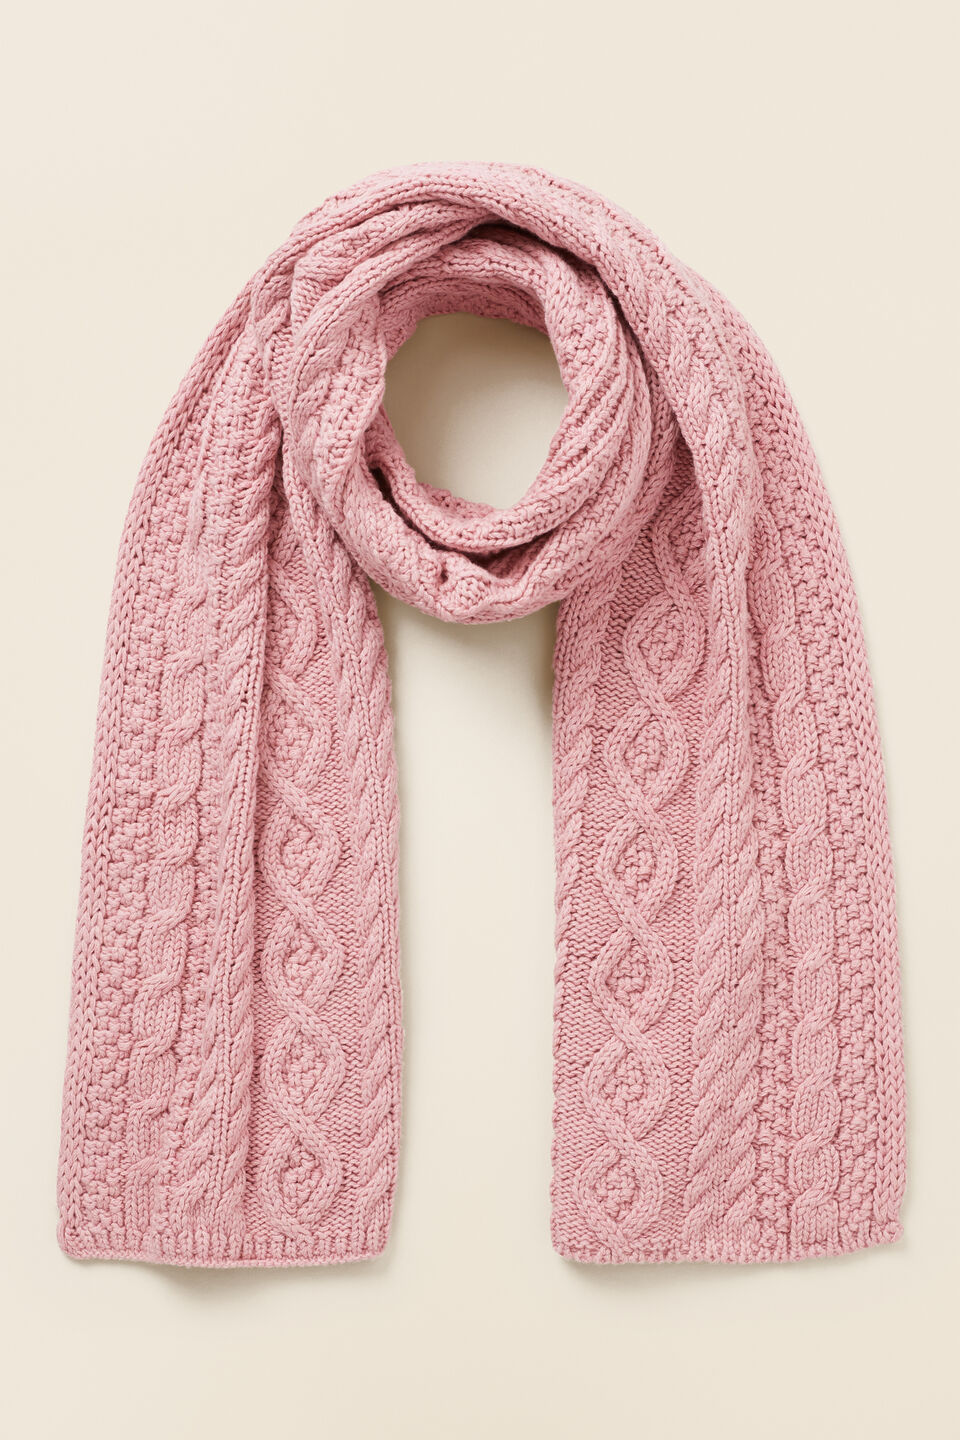 Knitted Cable Scarf  Soft Berry